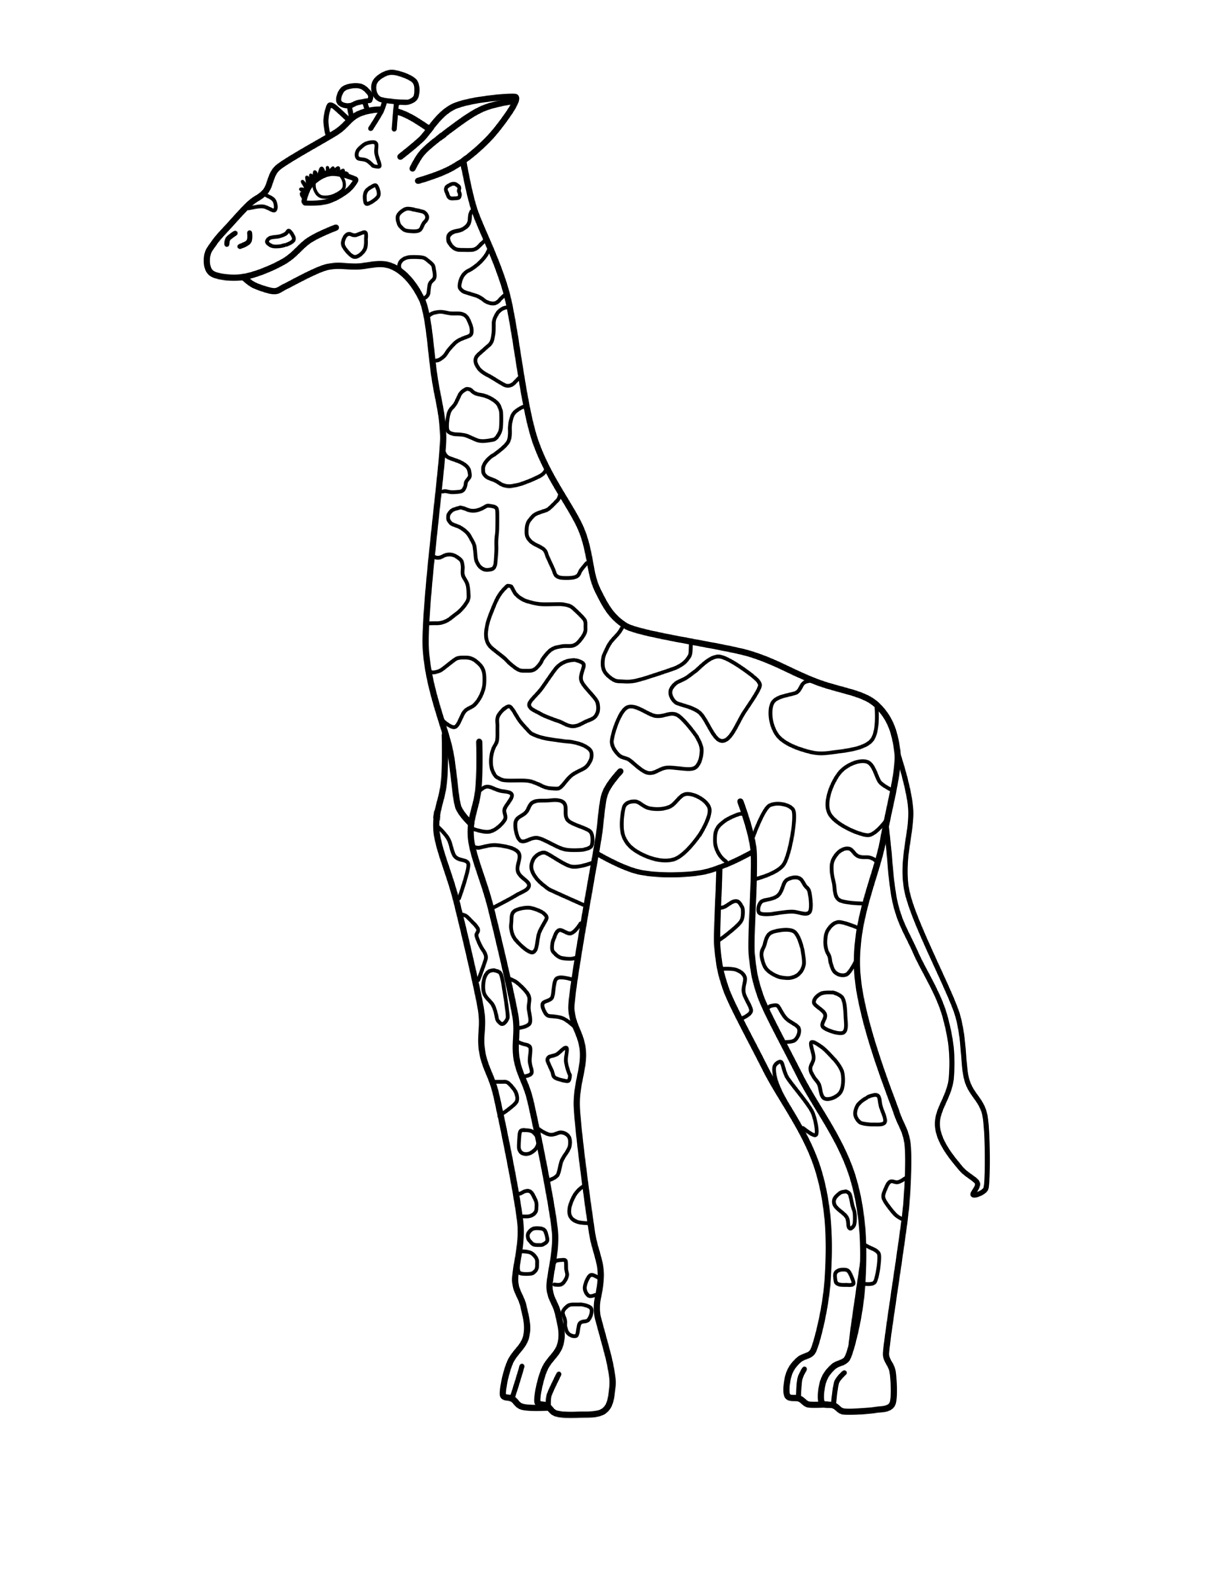 Giraffe Color Pages Coloring Page